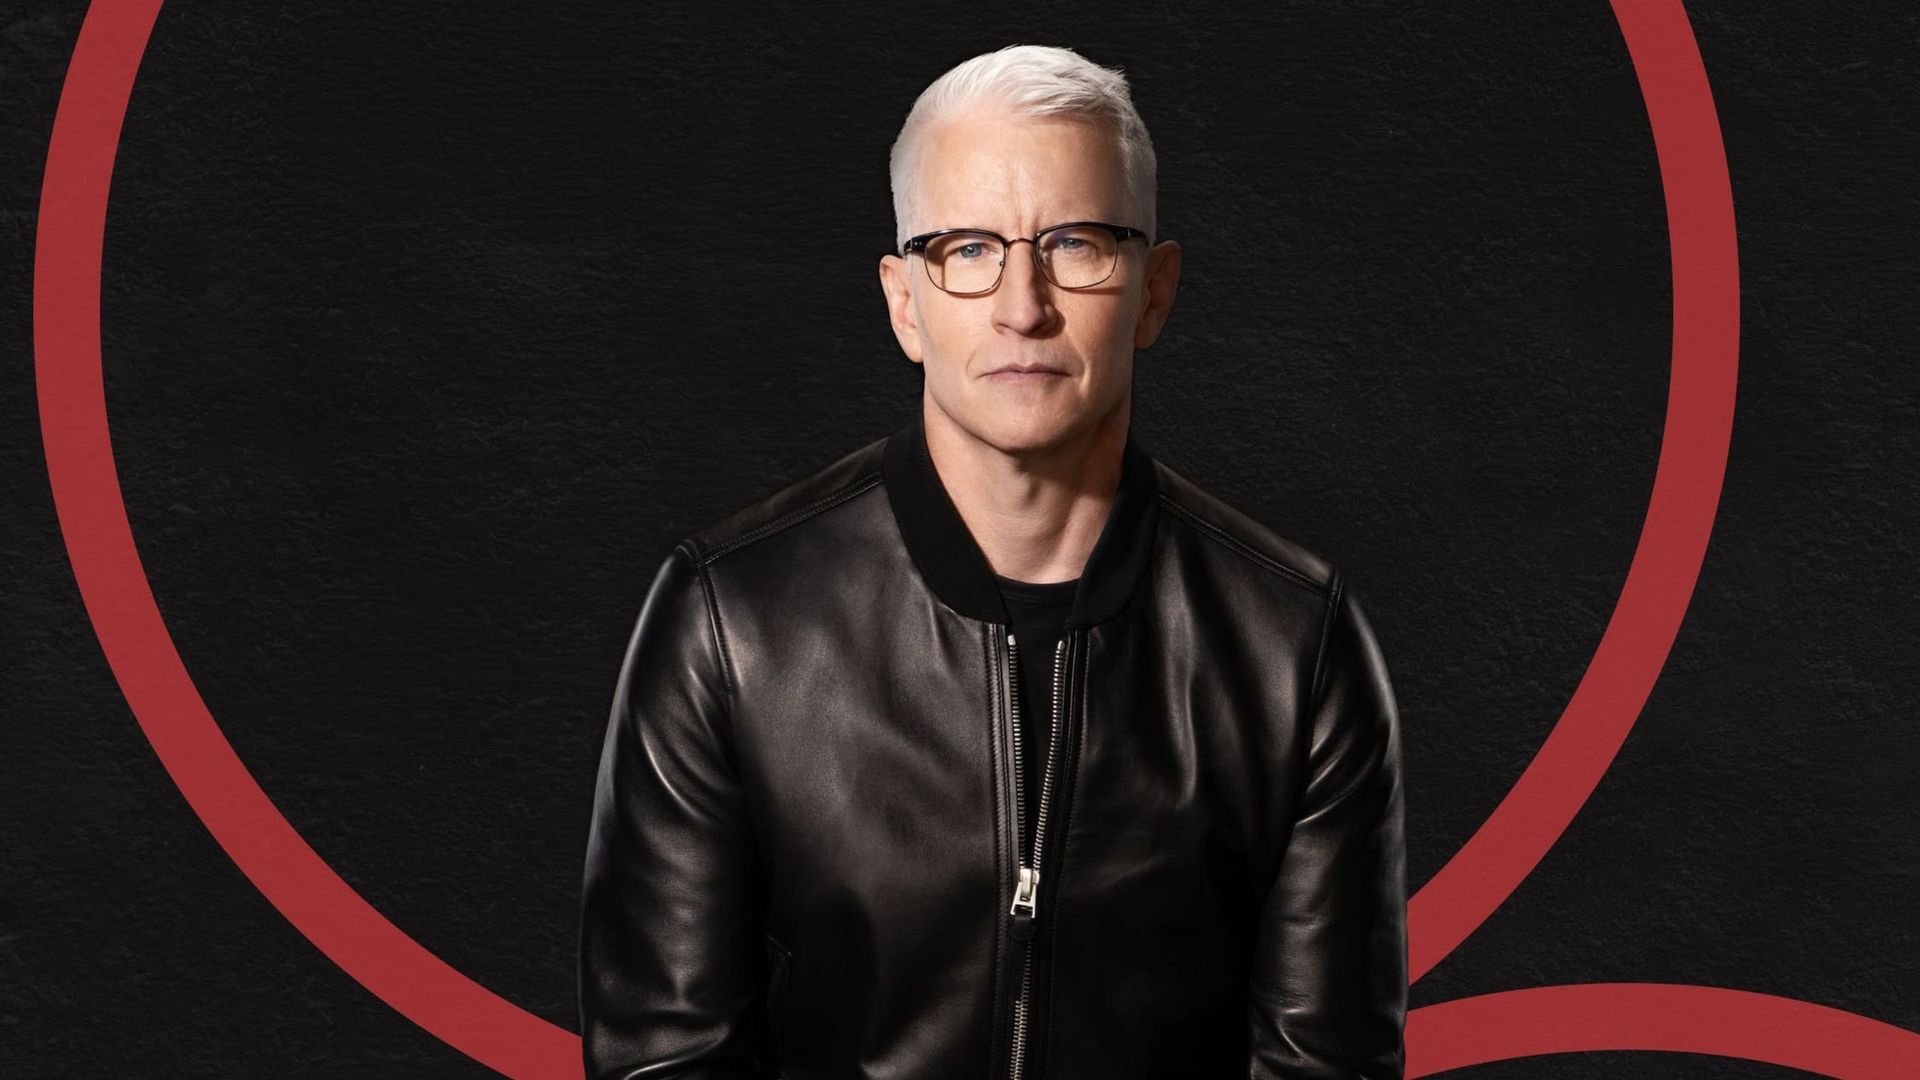 Anderson Cooper Full Circle background